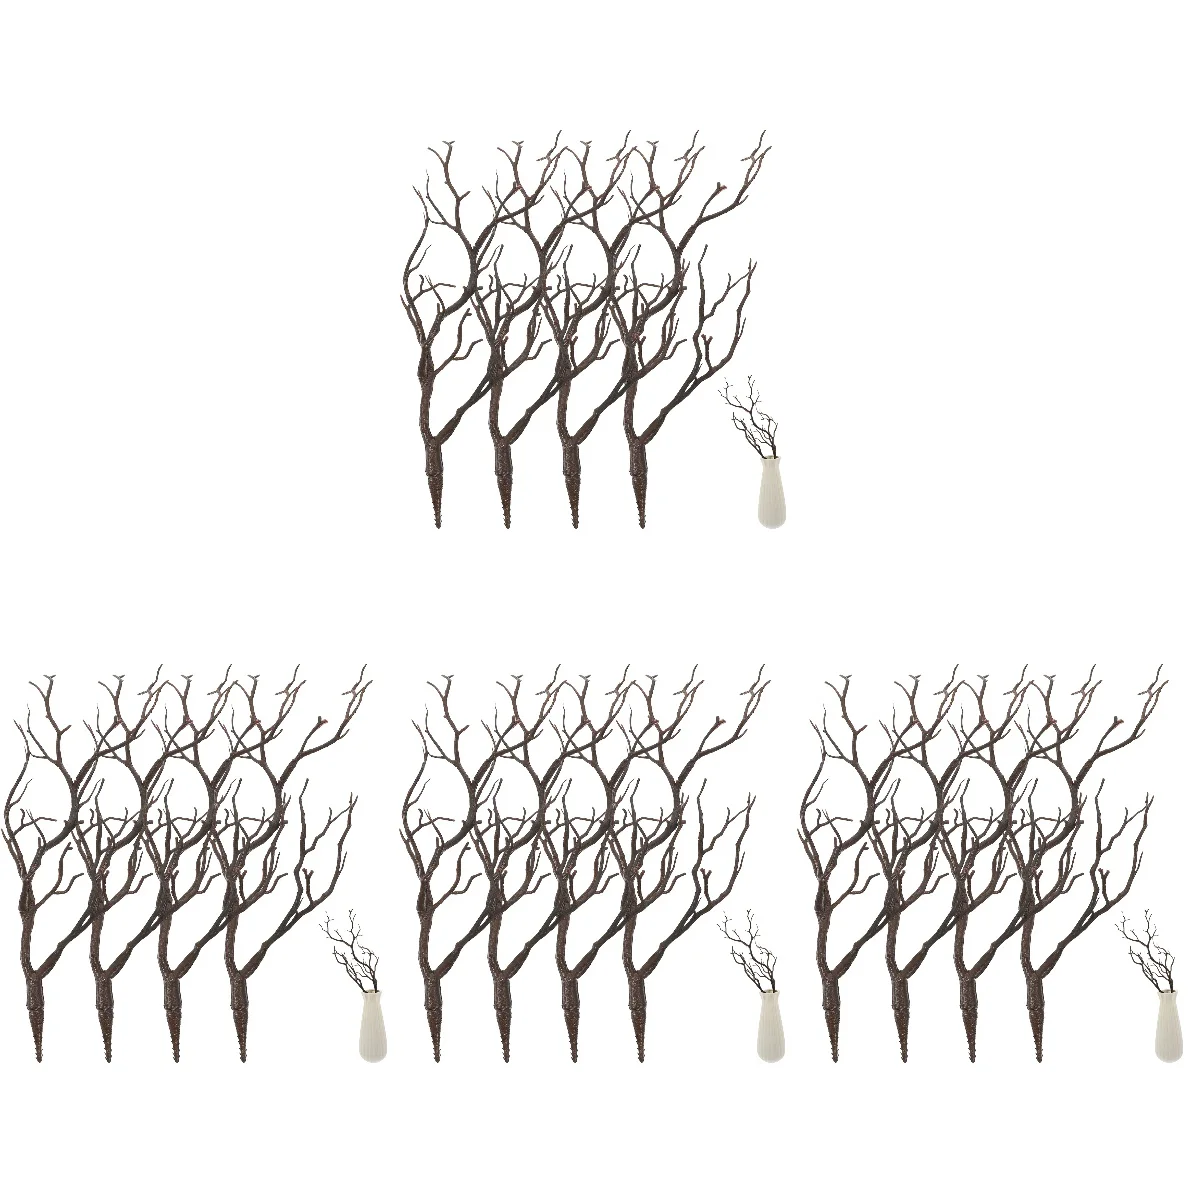 

16 pcs Artificial Dried Plastic Antler Branches Plastic DIY Craft Branches Decorative Stems